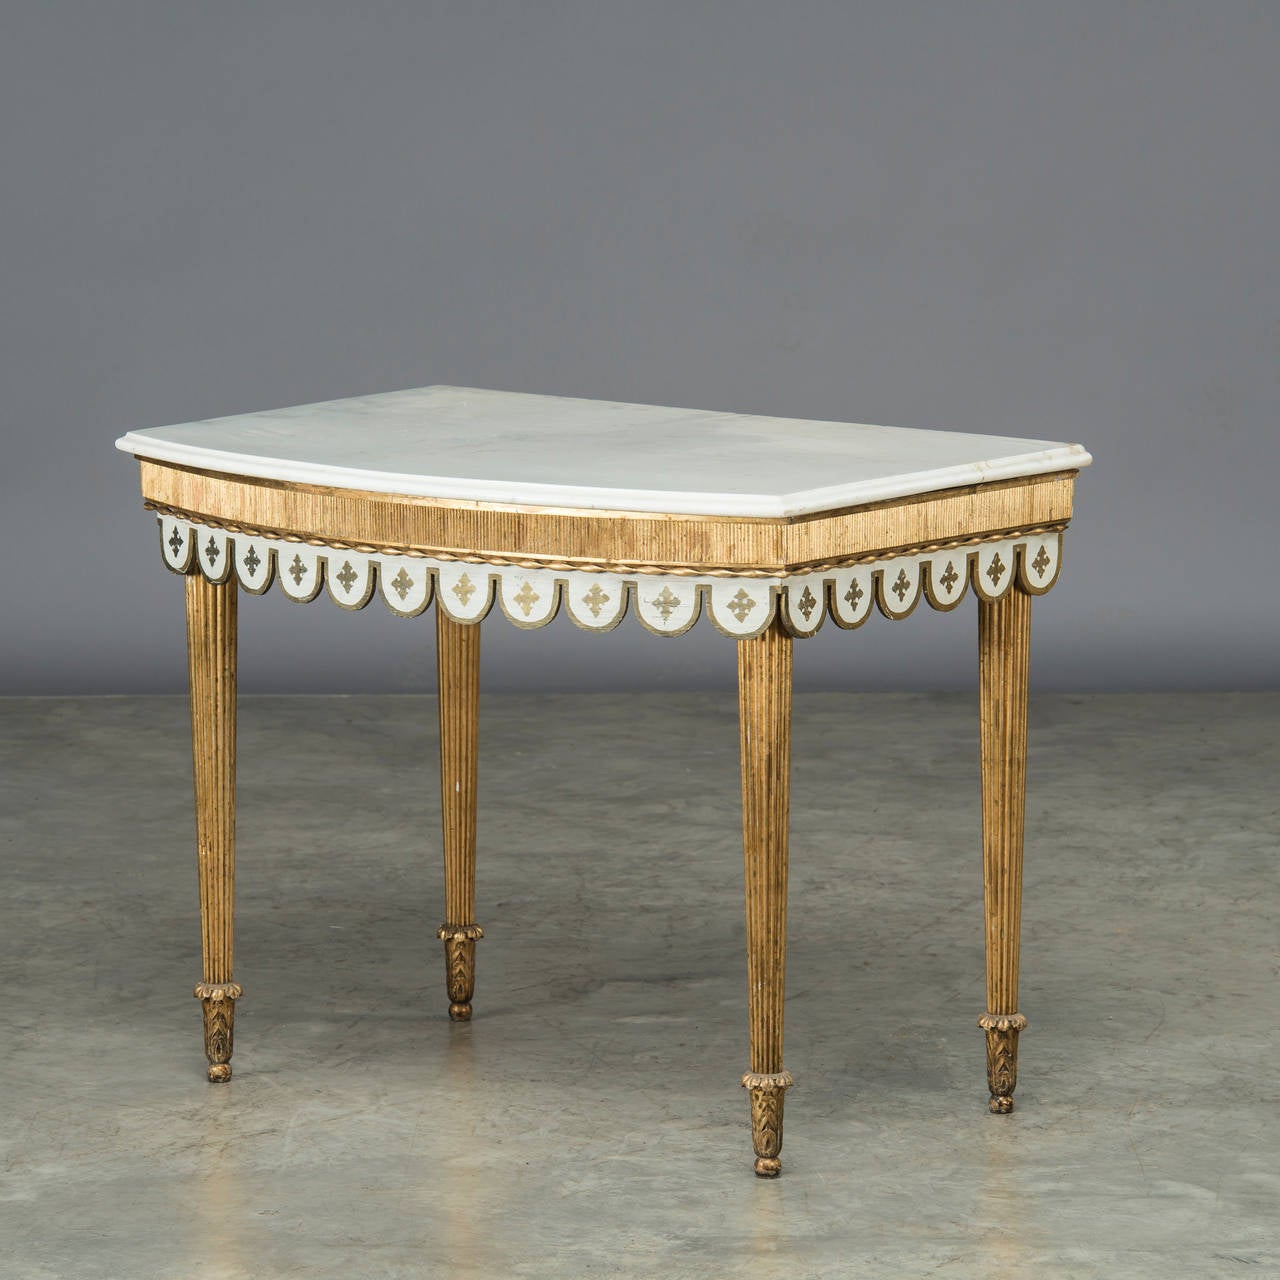 Louis XVI console table with beautiful white marble top with profiled edge. Legs and frame in gilded wood with grooves. Below the frame, half-rounded wood carvings with gilded fleur-de-lis, Denmark, circa 1780.